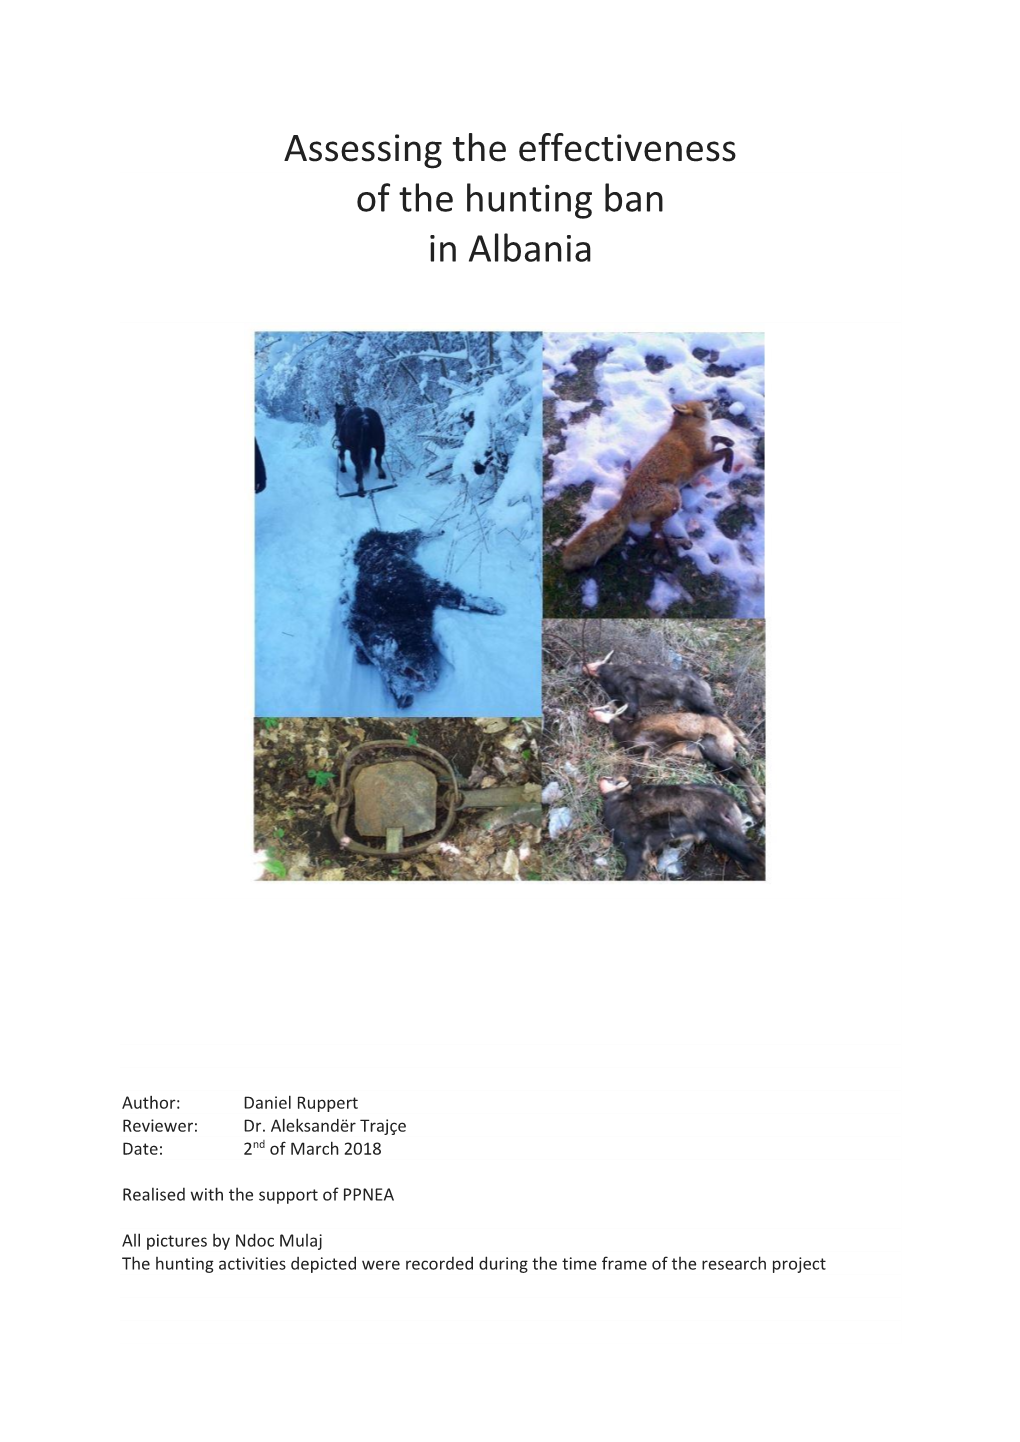 Assessing the Effectiveness of the Hunting Ban in Albania